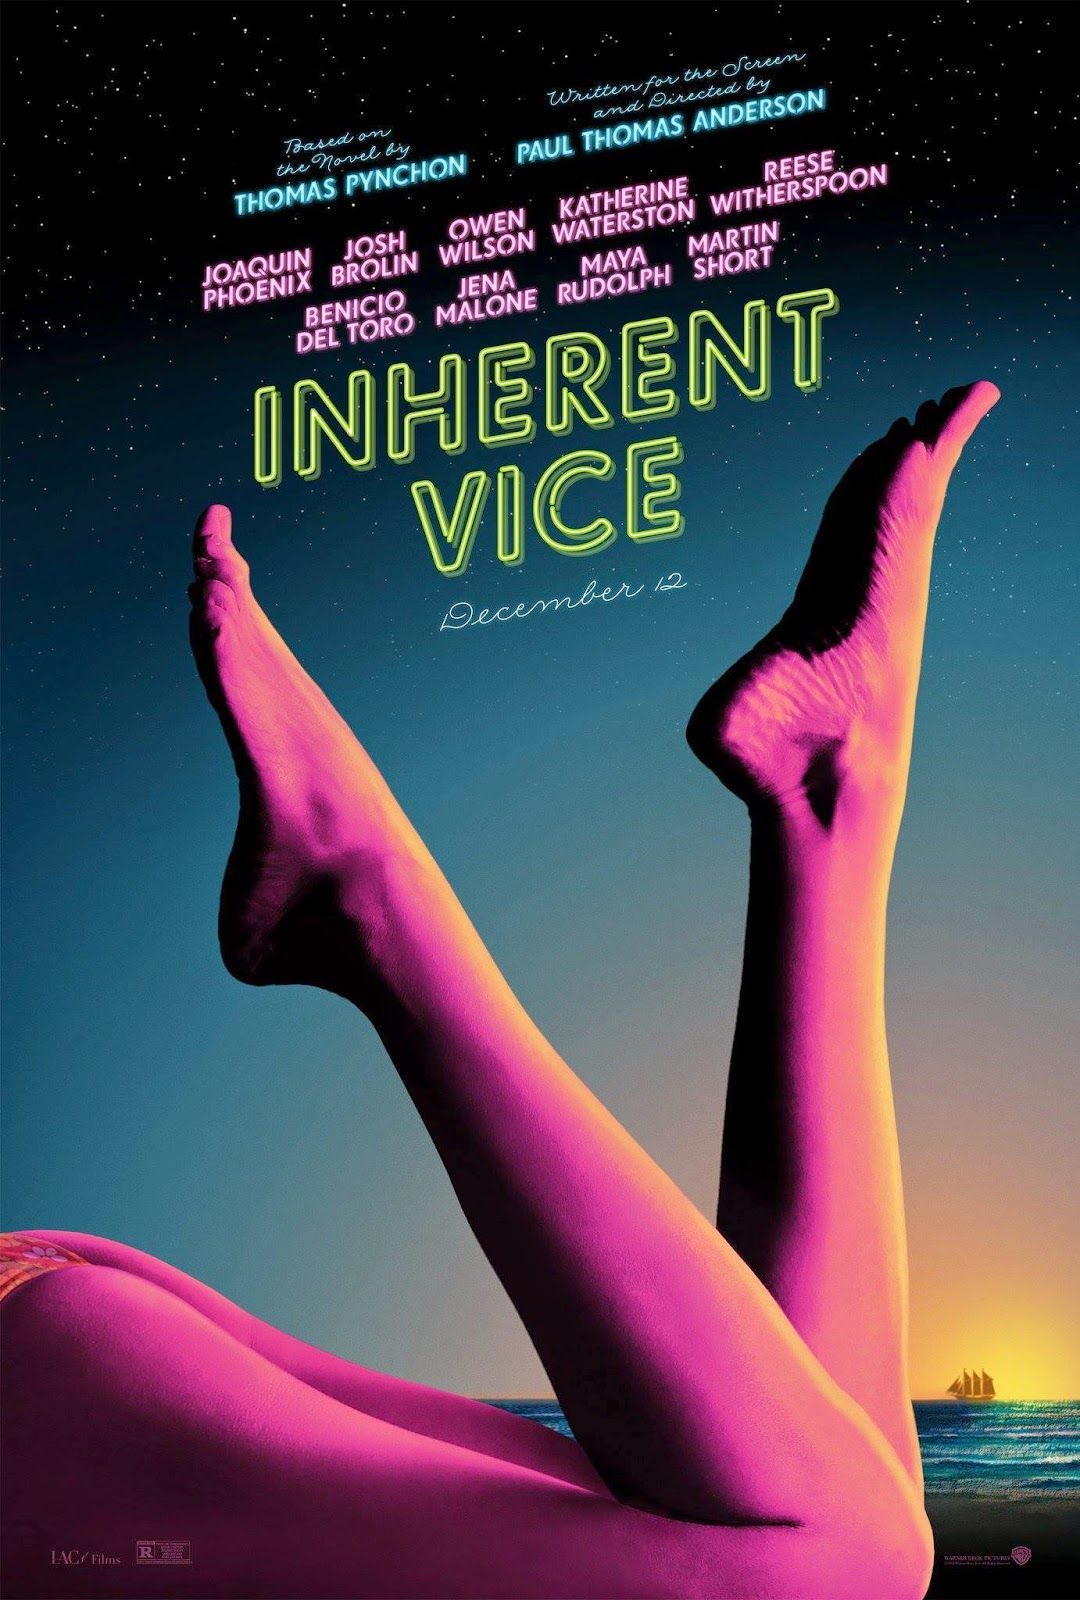 Too Faithful to Succeed: On "Inherent Vice"